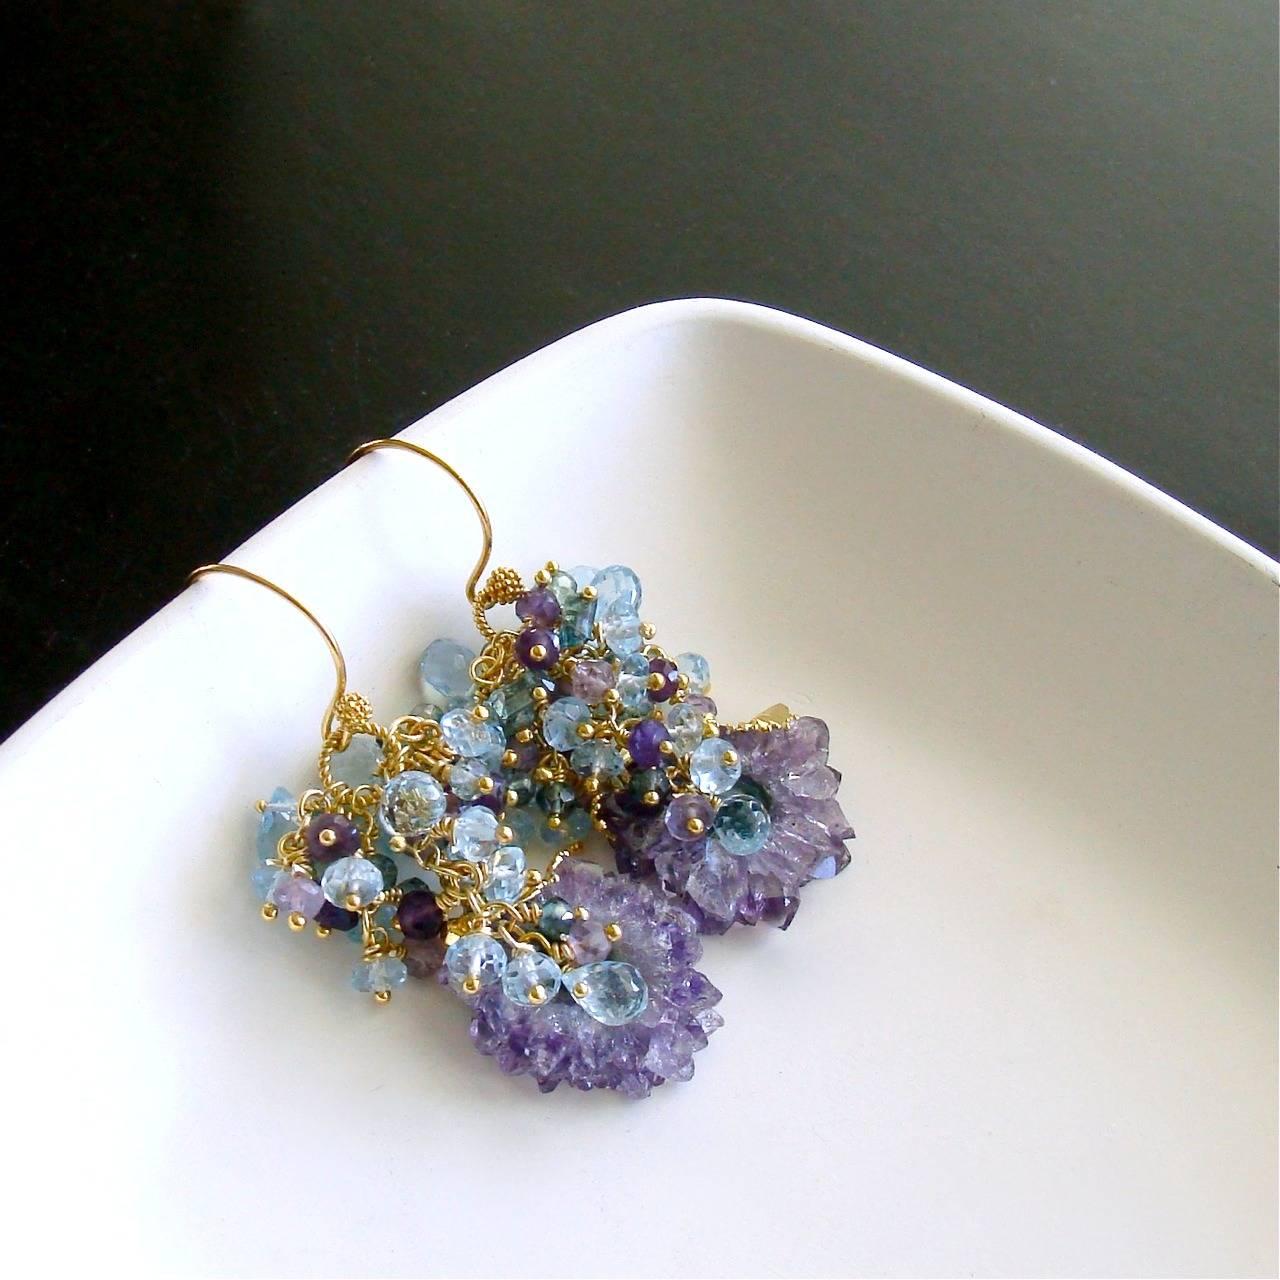 Seanna Earrings.

One of Mother Nature’s curiosities, amethyst stalactite slices have become the focal point of these jaw dropping cluster earrings. These delicate and spiny slices are gently nestled amongst ethereal clusters of dark and pink